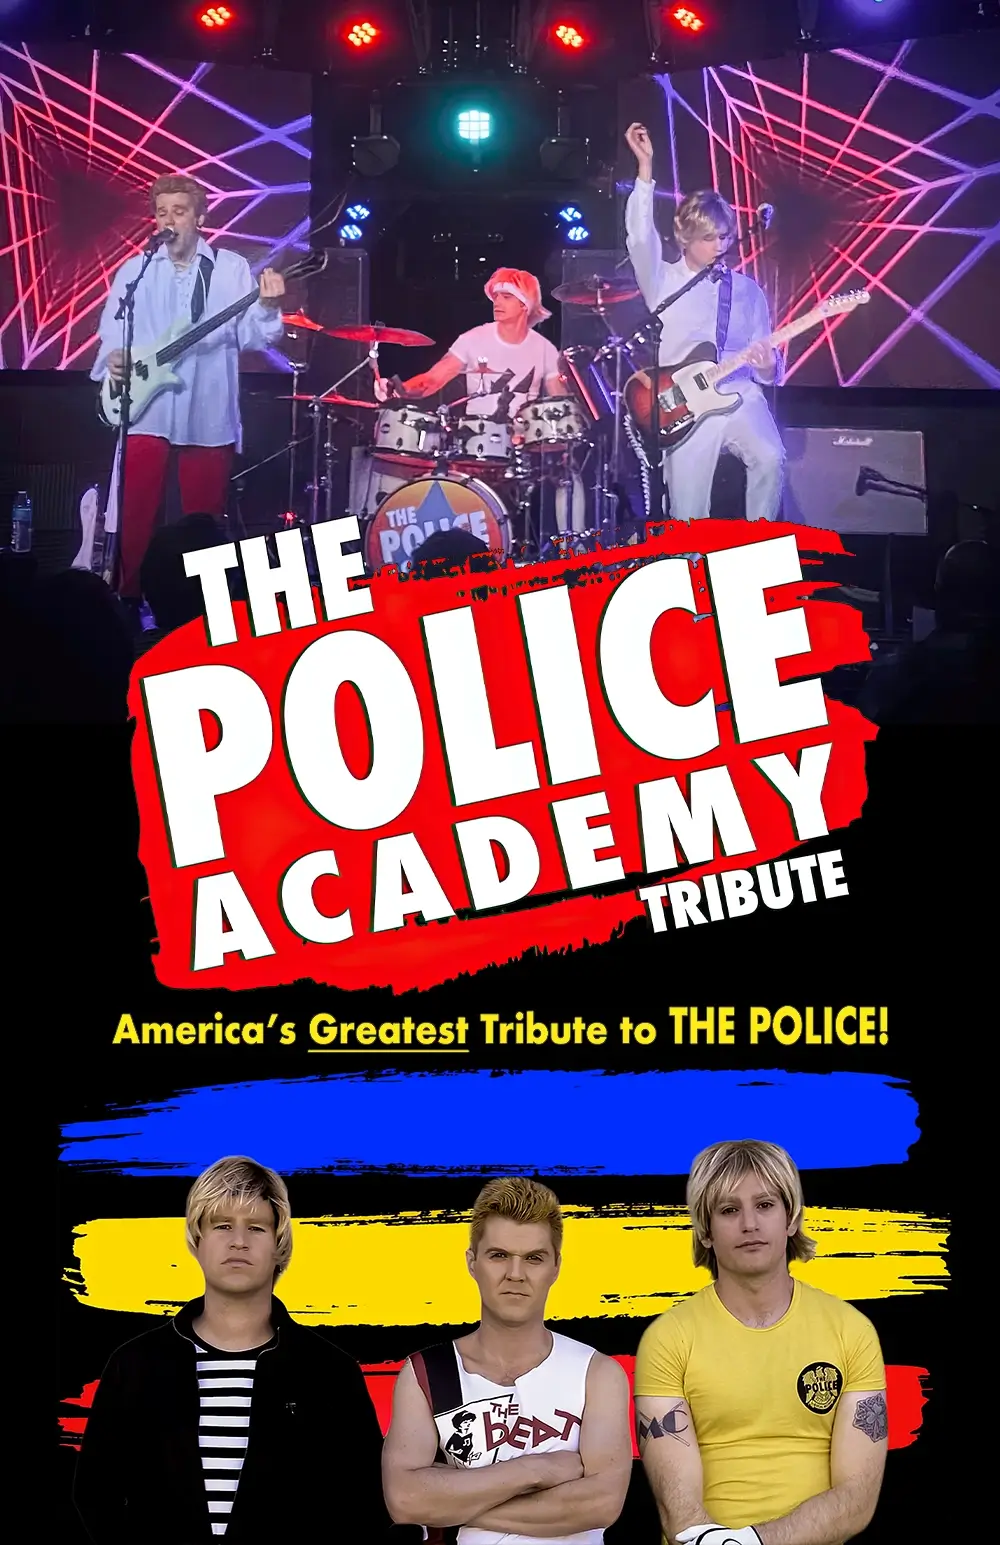 The Police Academy EPK: Graphic assets. Download images and logos.